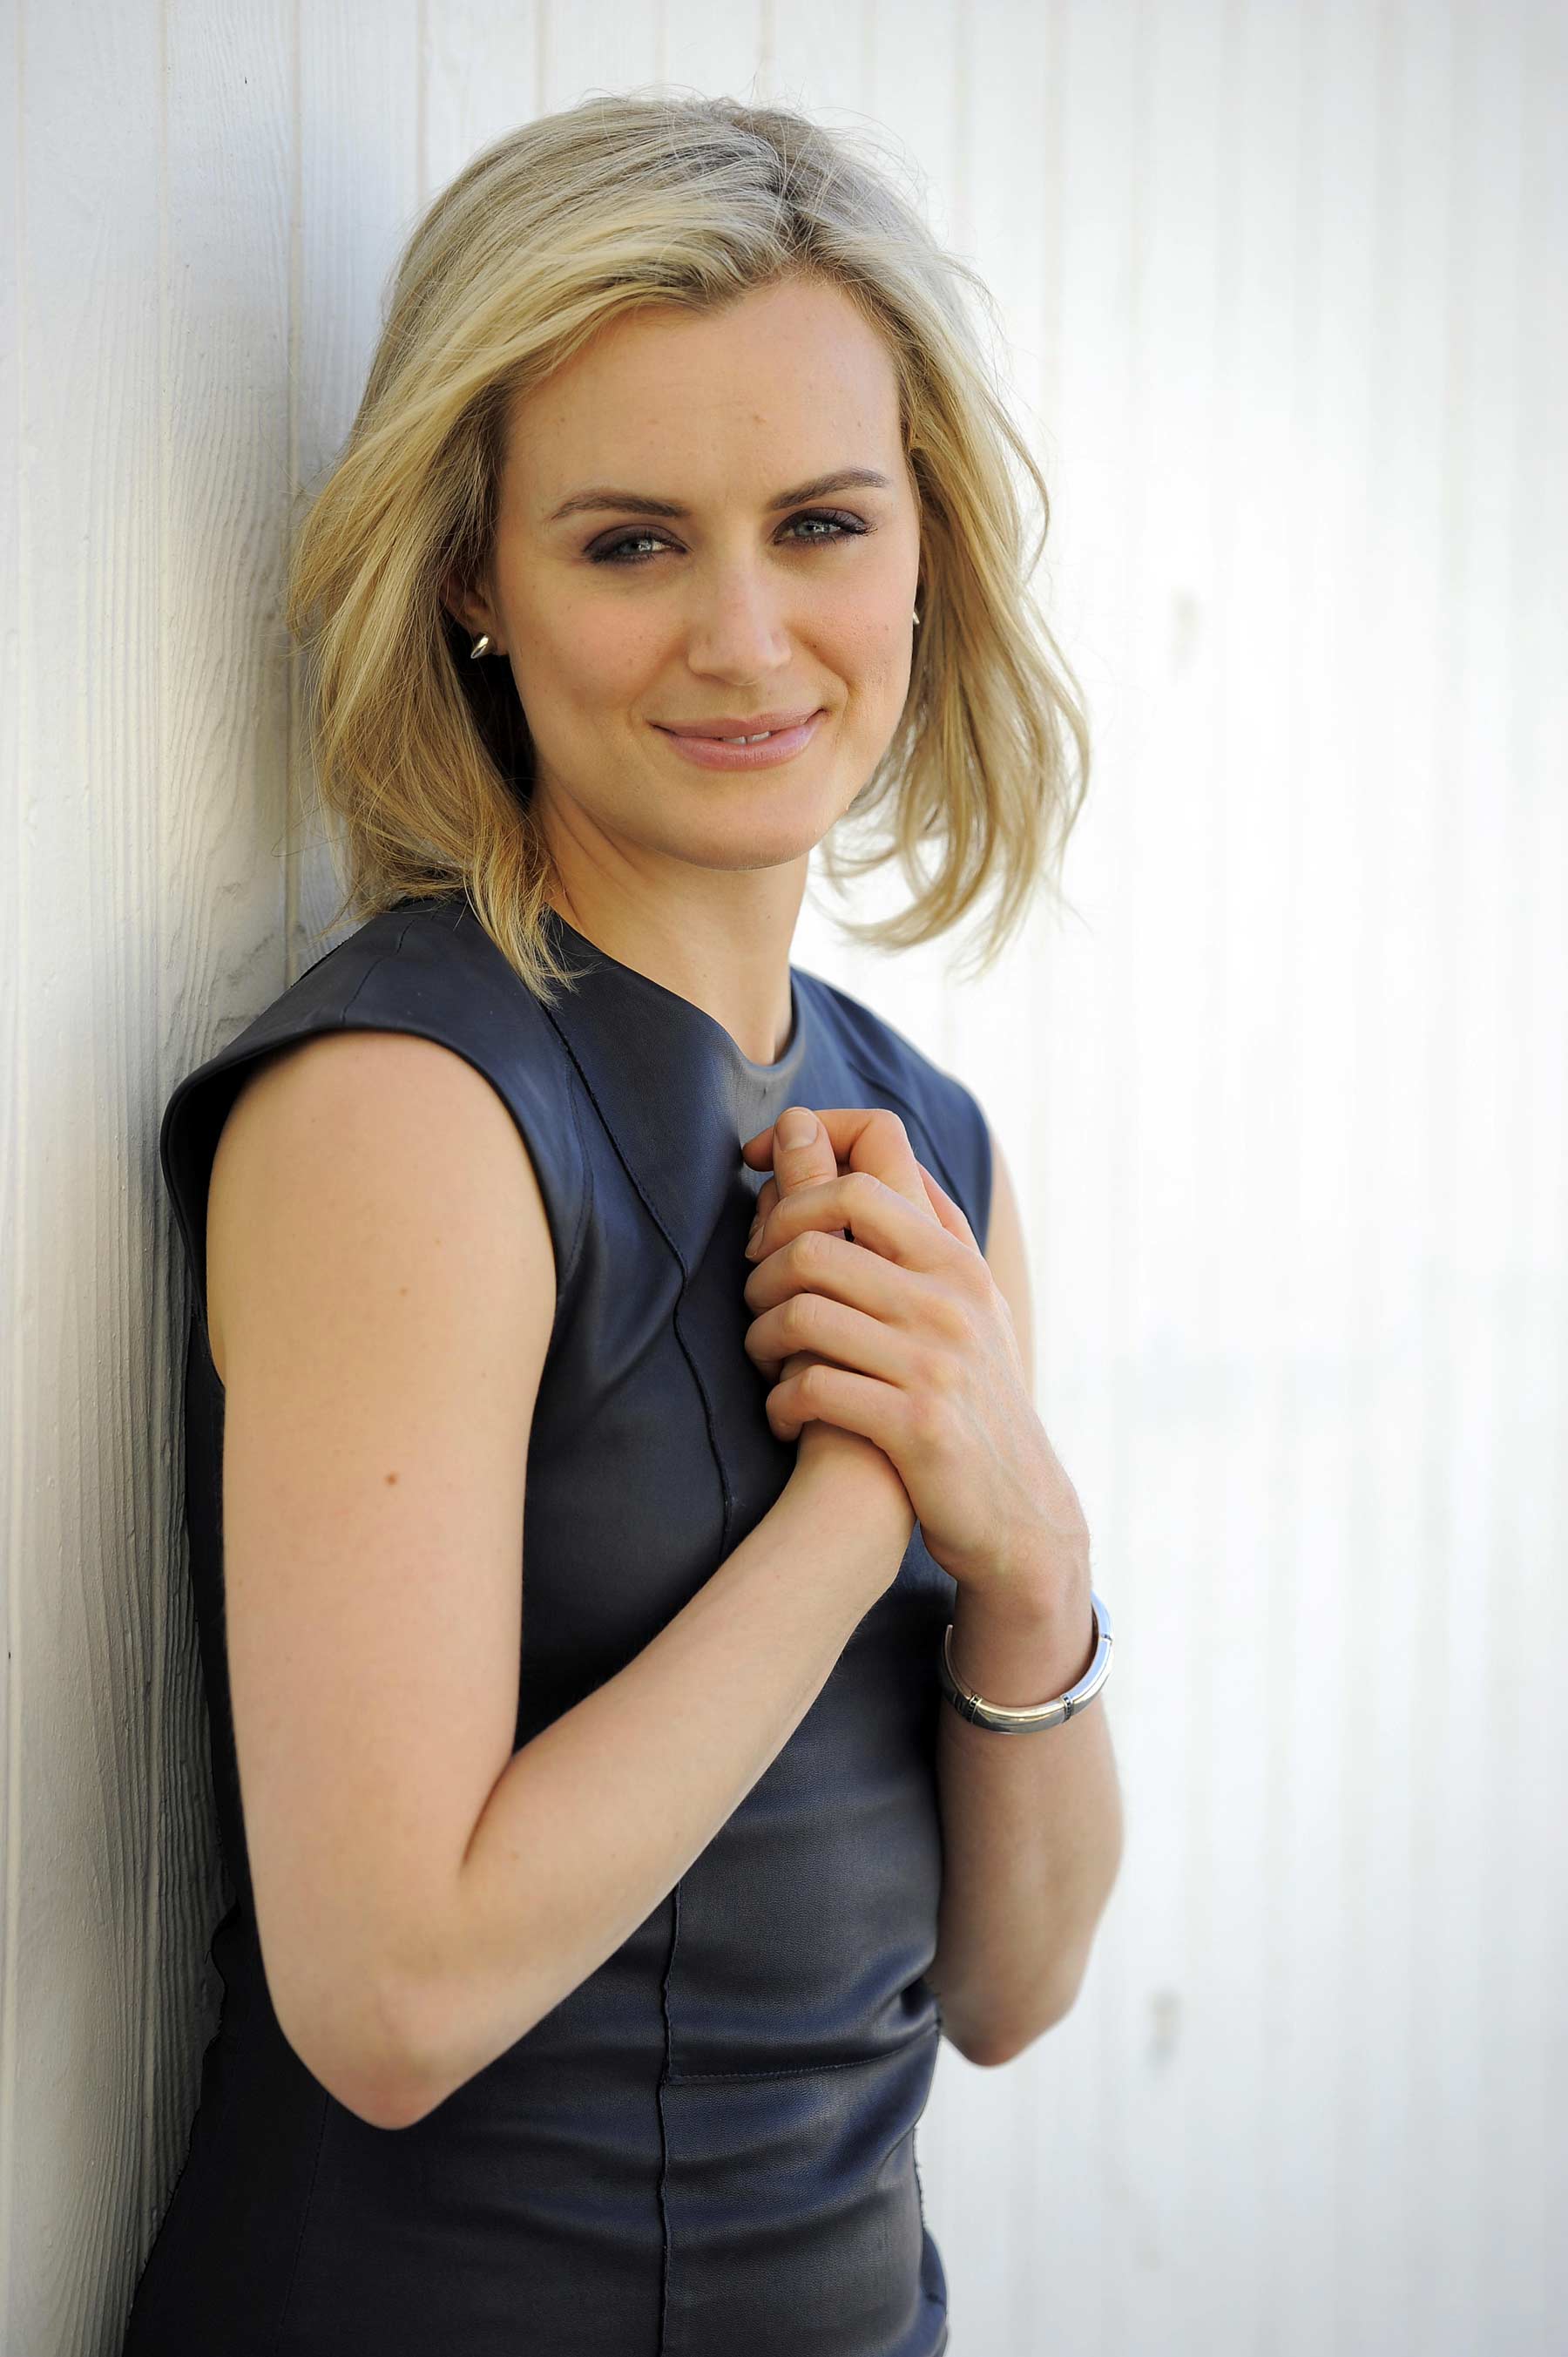 Taylor Schilling photoshoot by Chris Pizzello